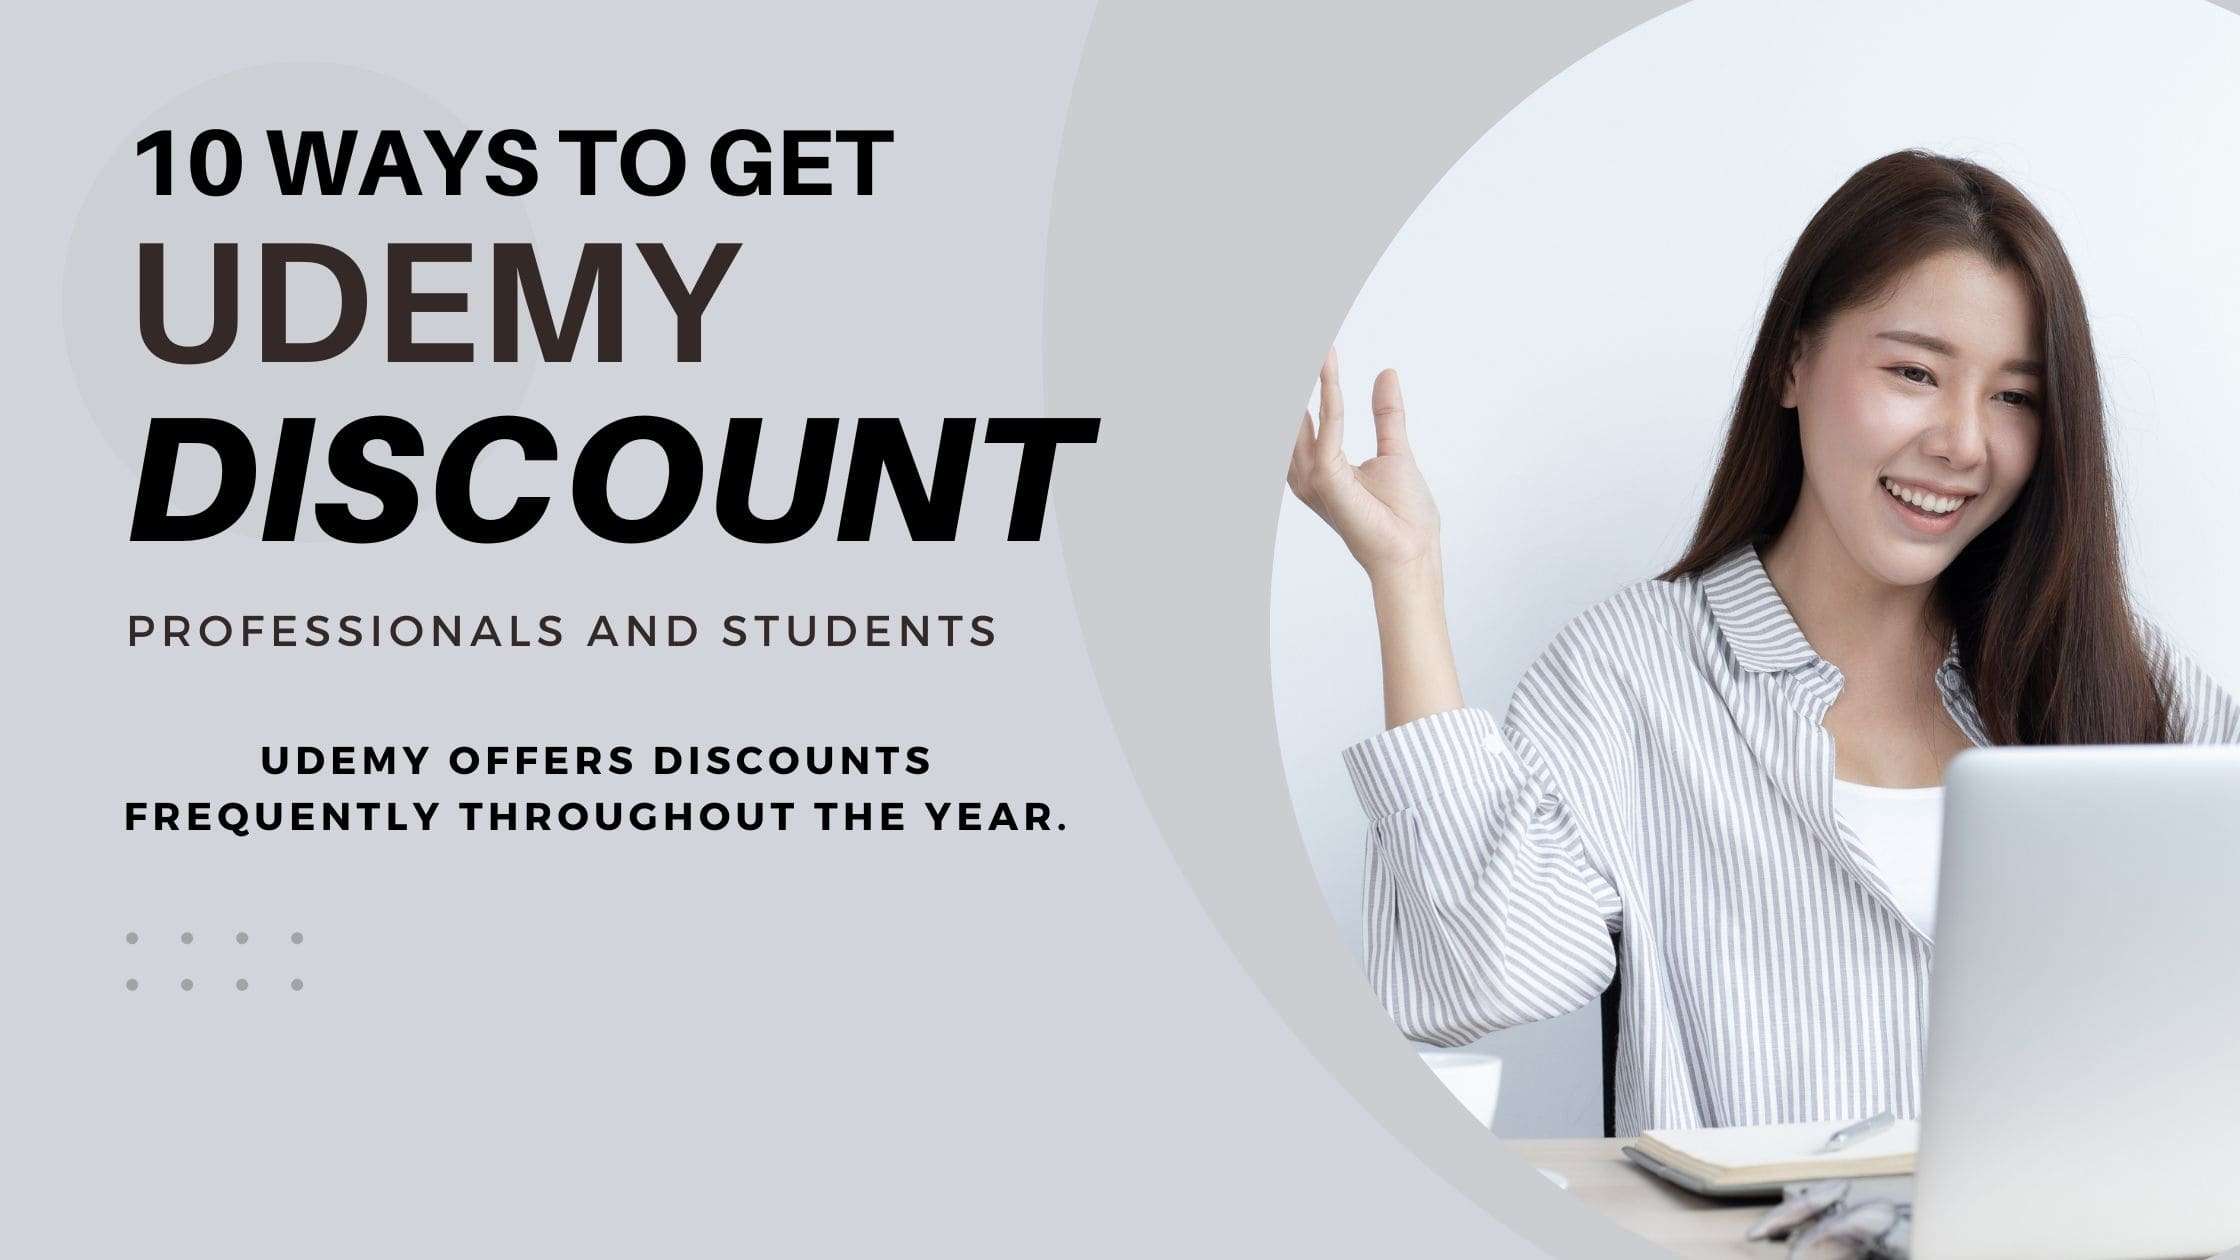 10 Ways To Get A Discount On Udemy: (Professionals and Students)